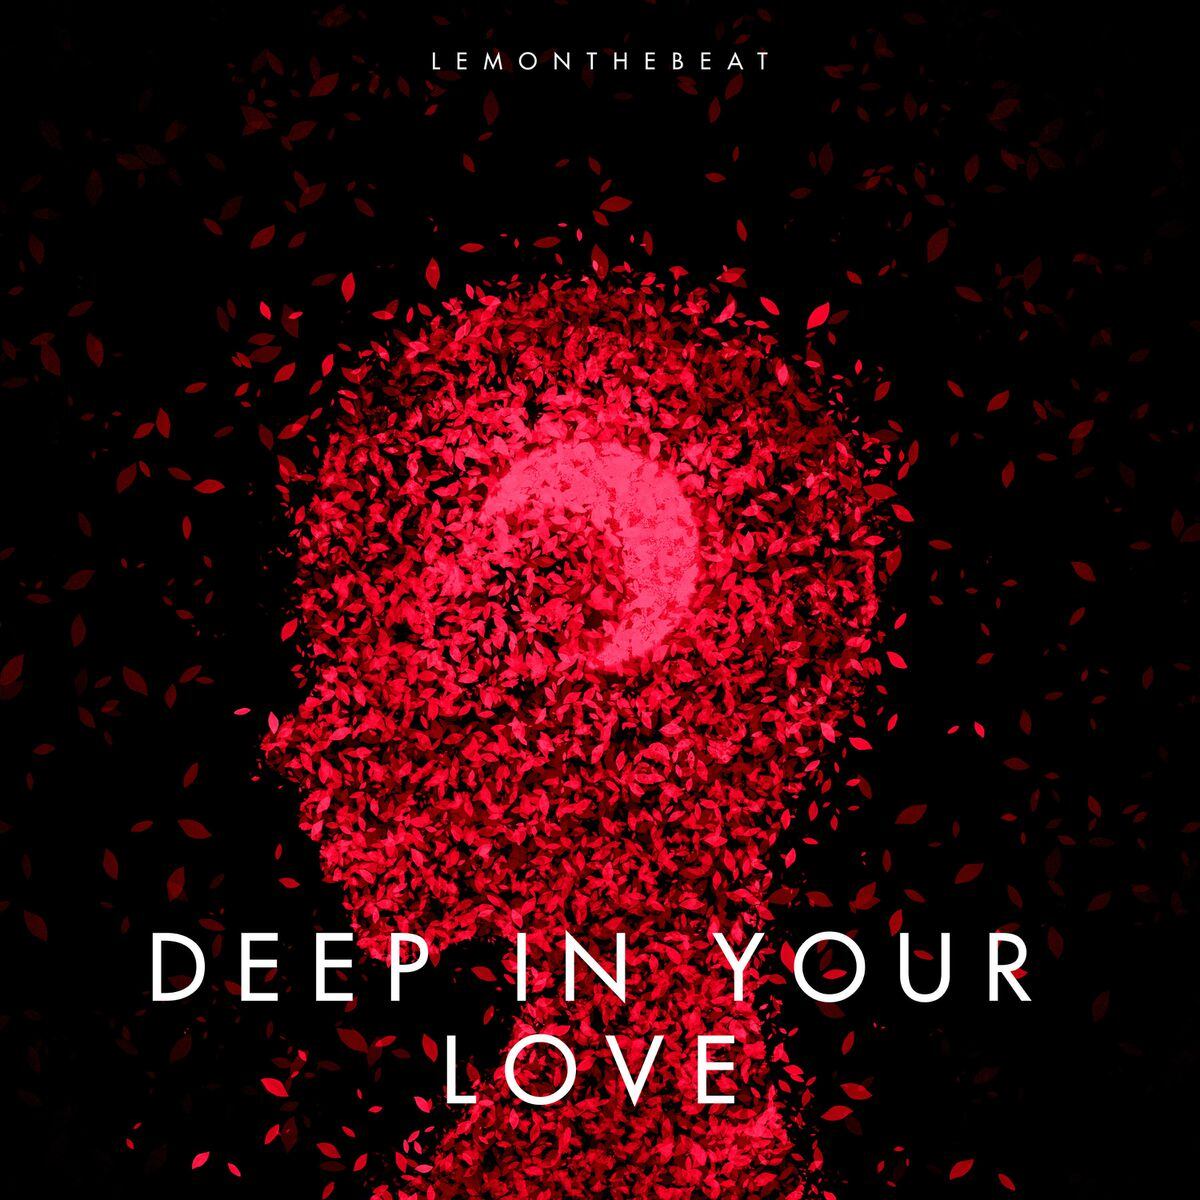 Deep in your love